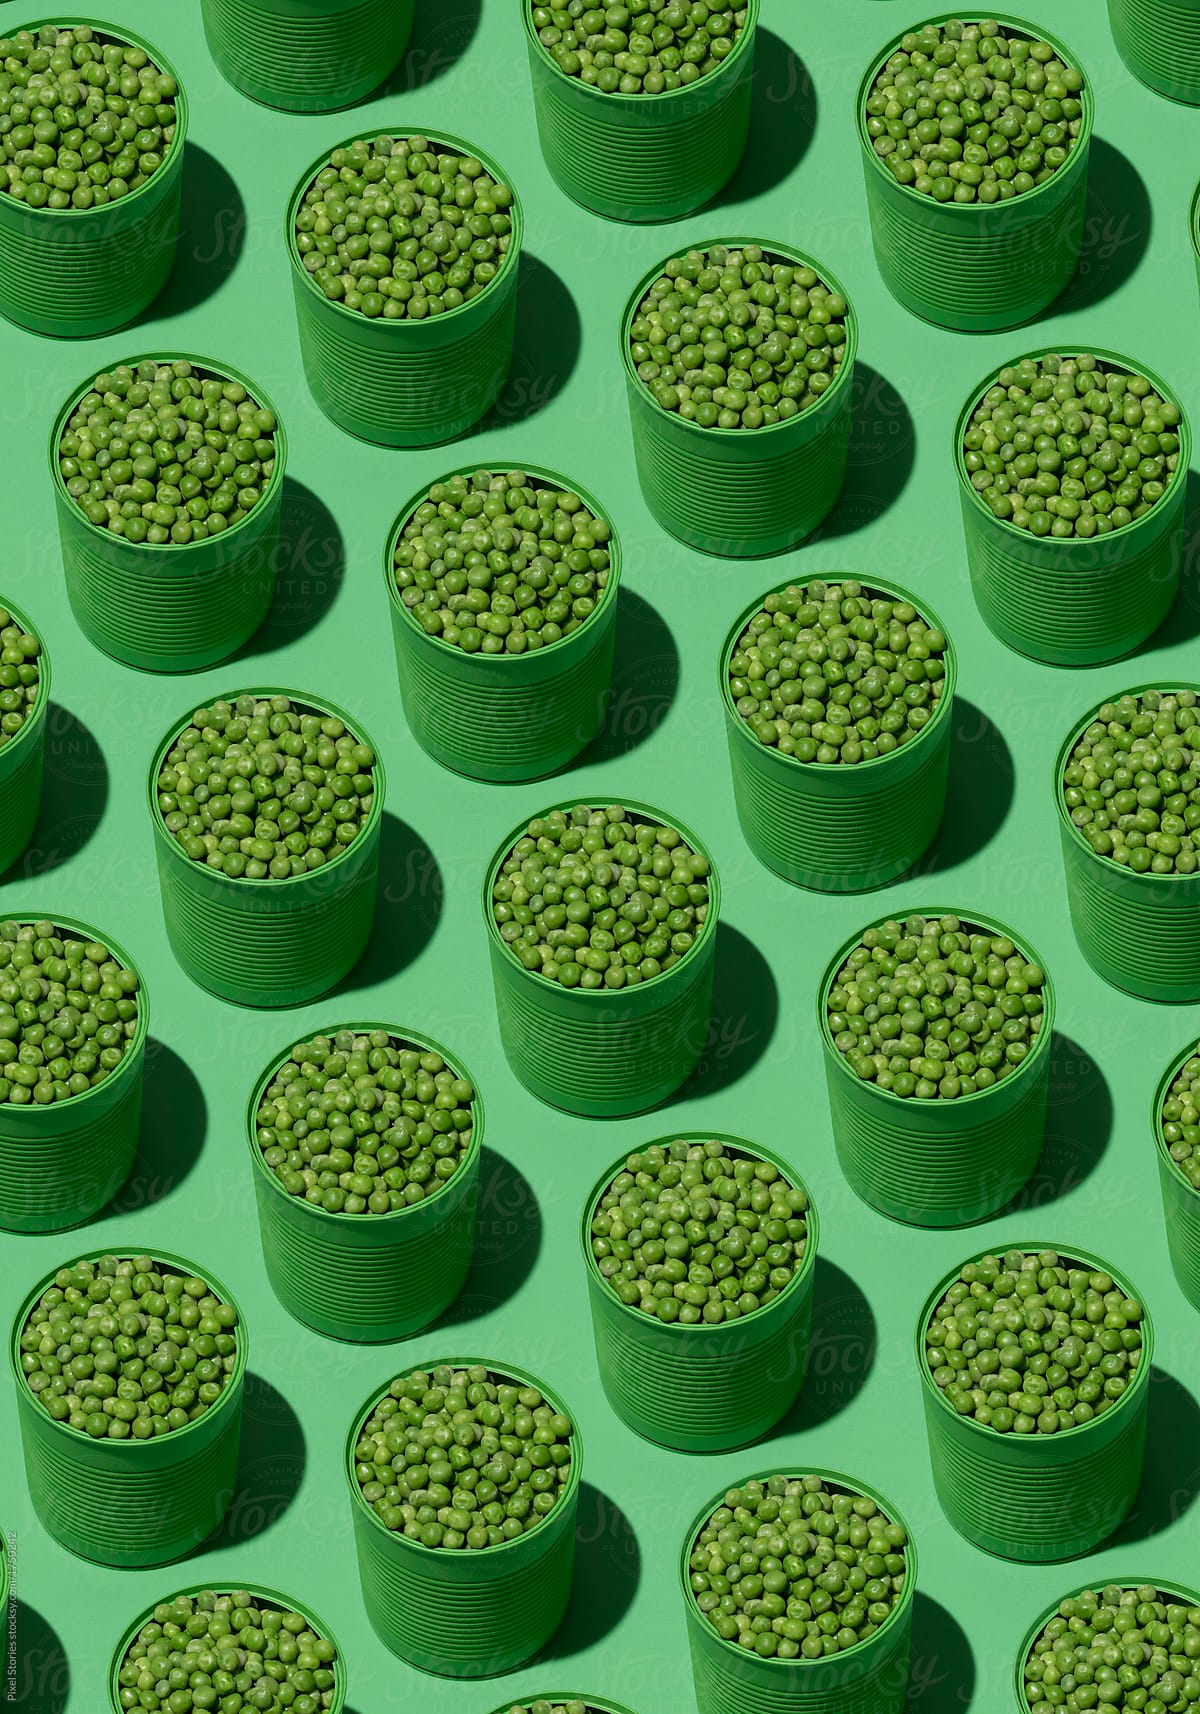 Canned peas background